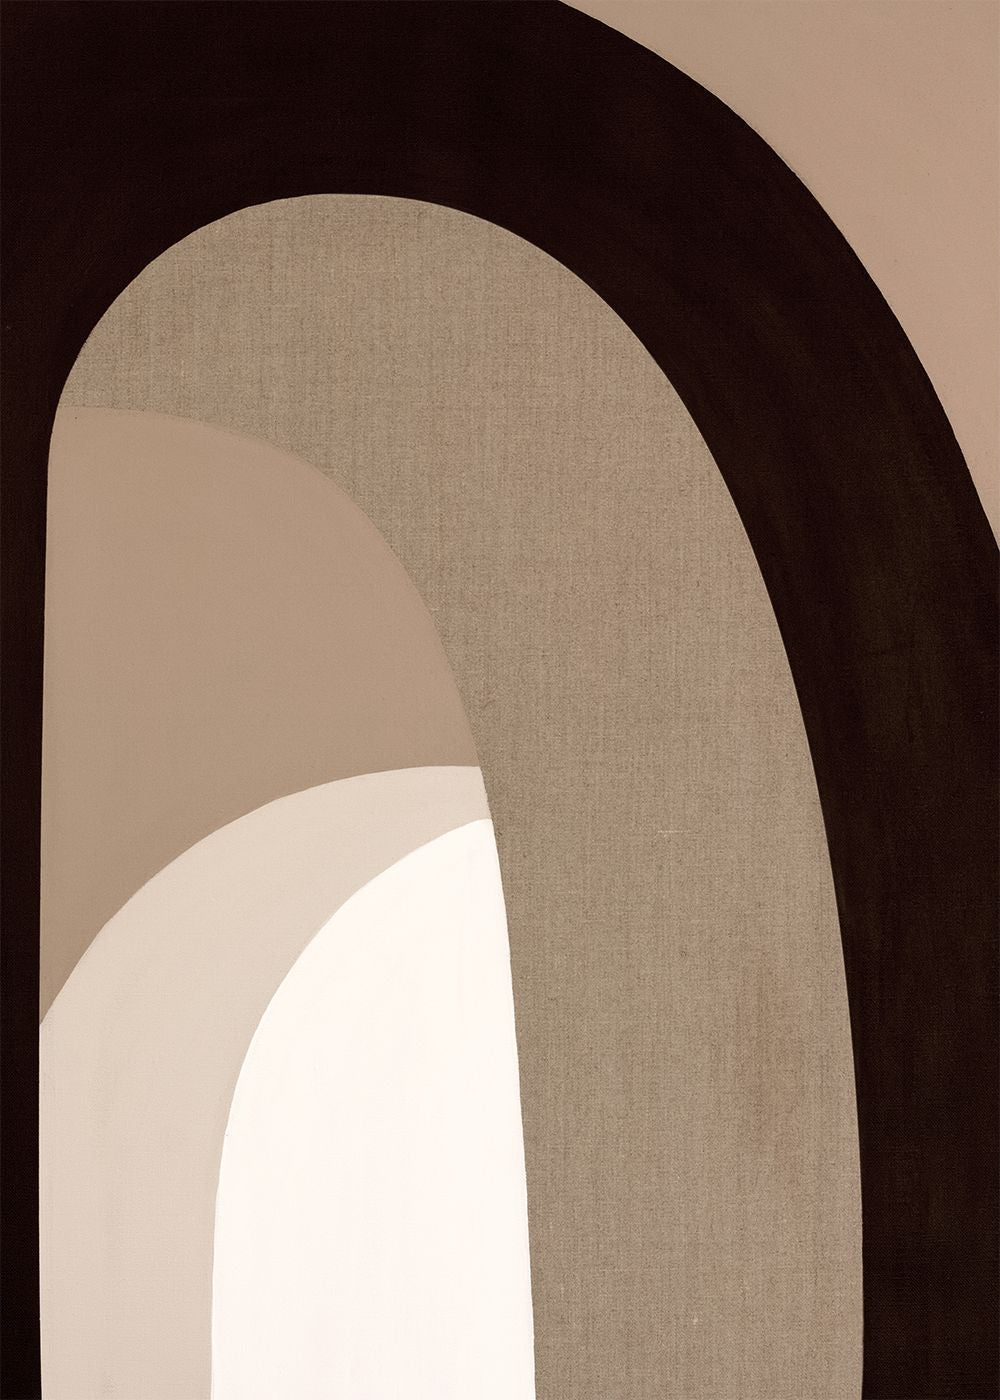 Paper Collective The Arch 01 Poster, 70x100 Cm